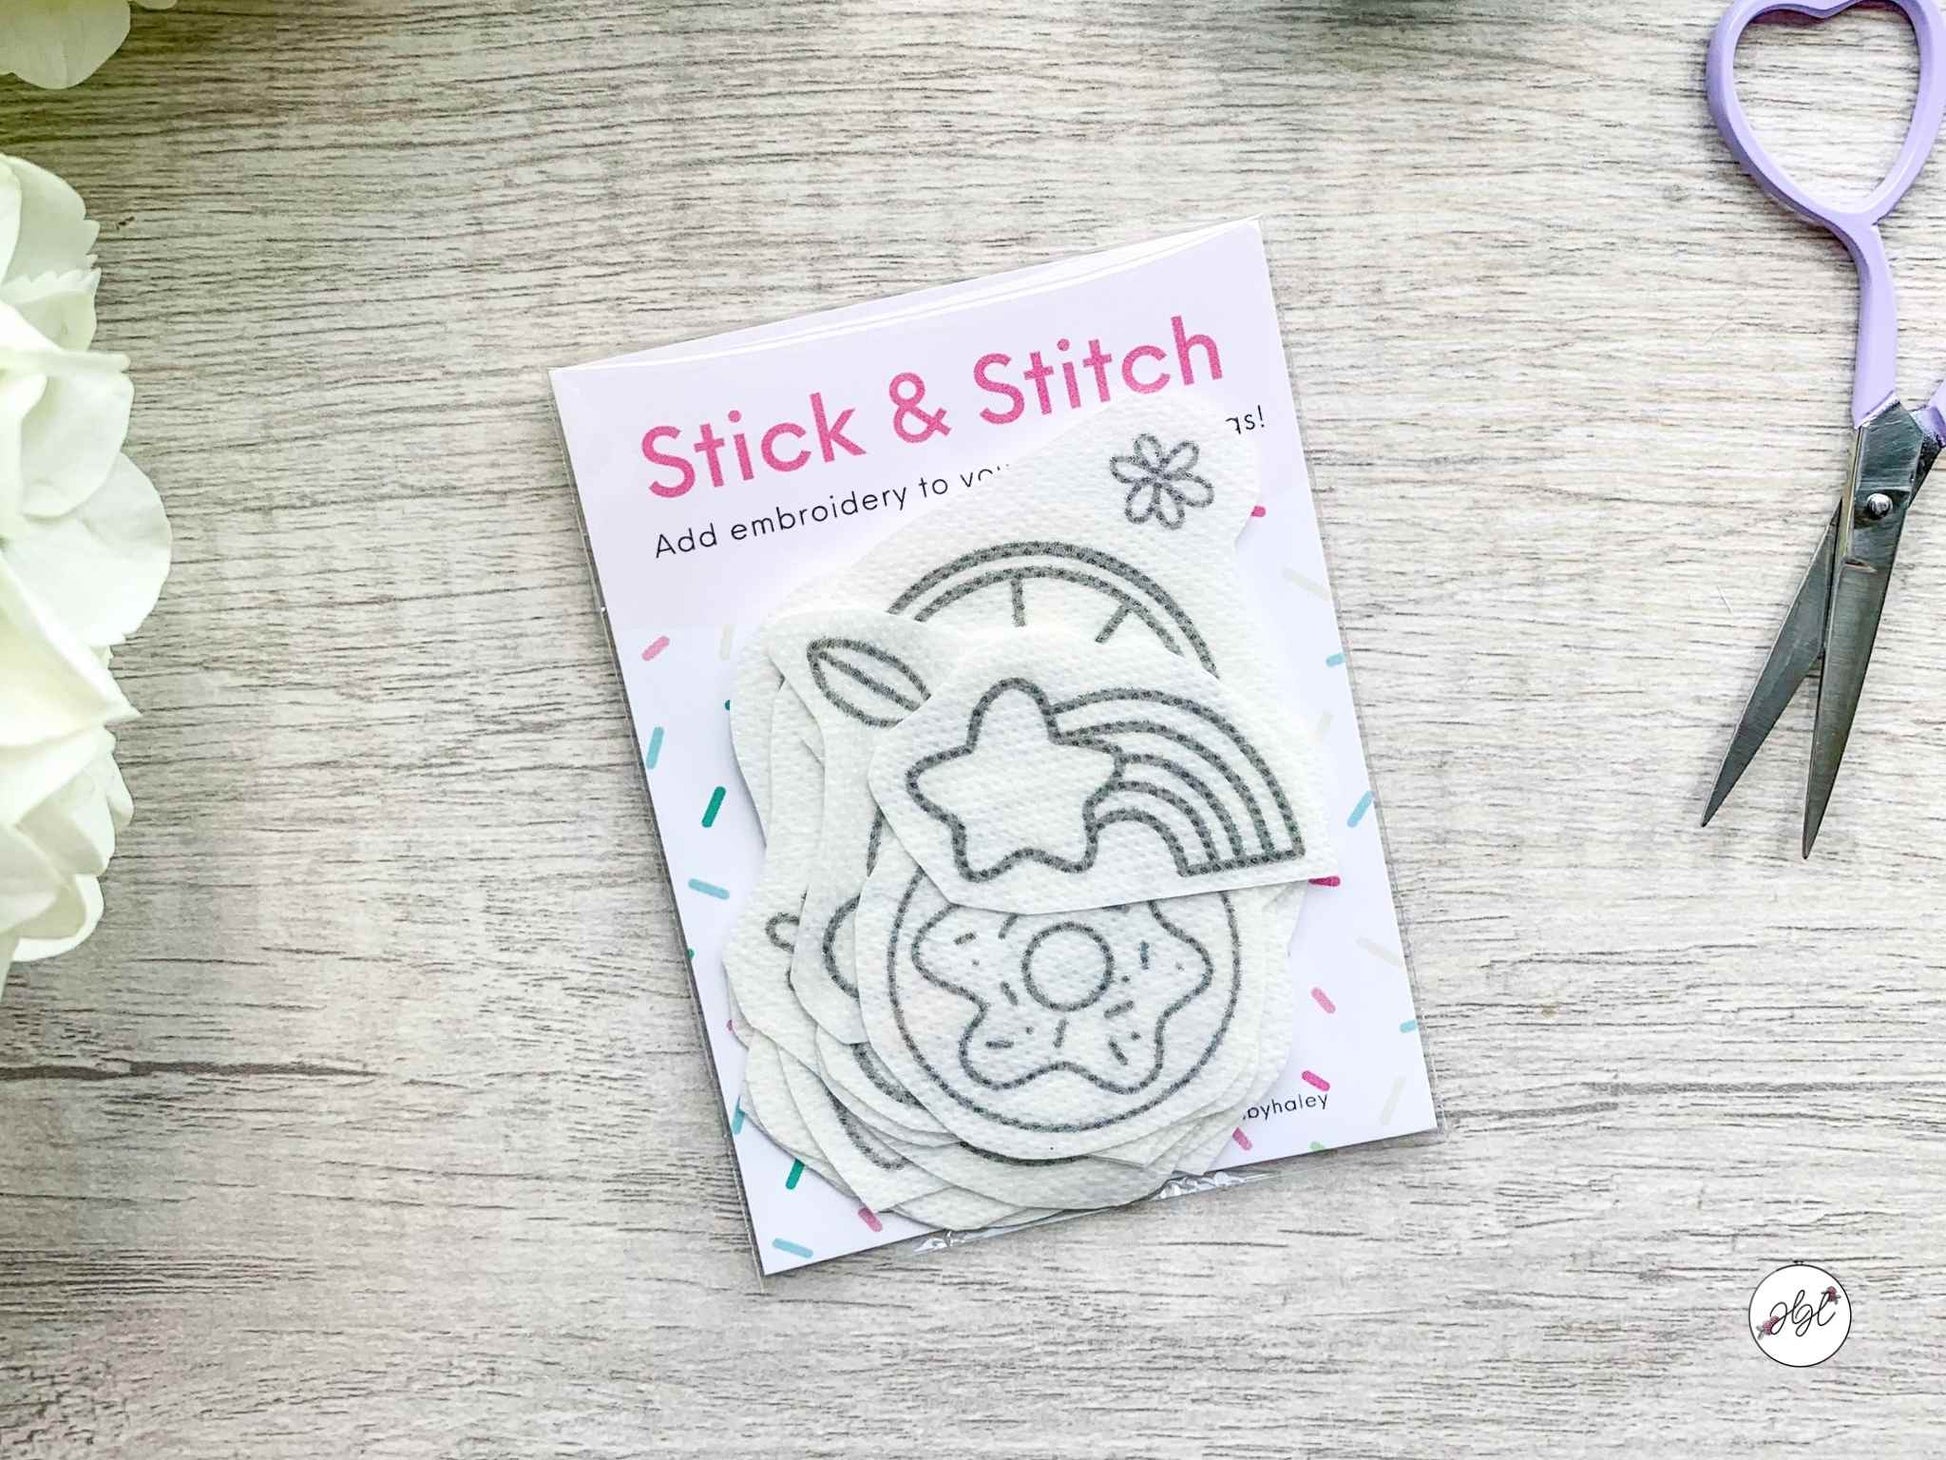 Kawaii stick and stitch embroidery designs in cute patterns next to embroidery scissors and hydrangeas